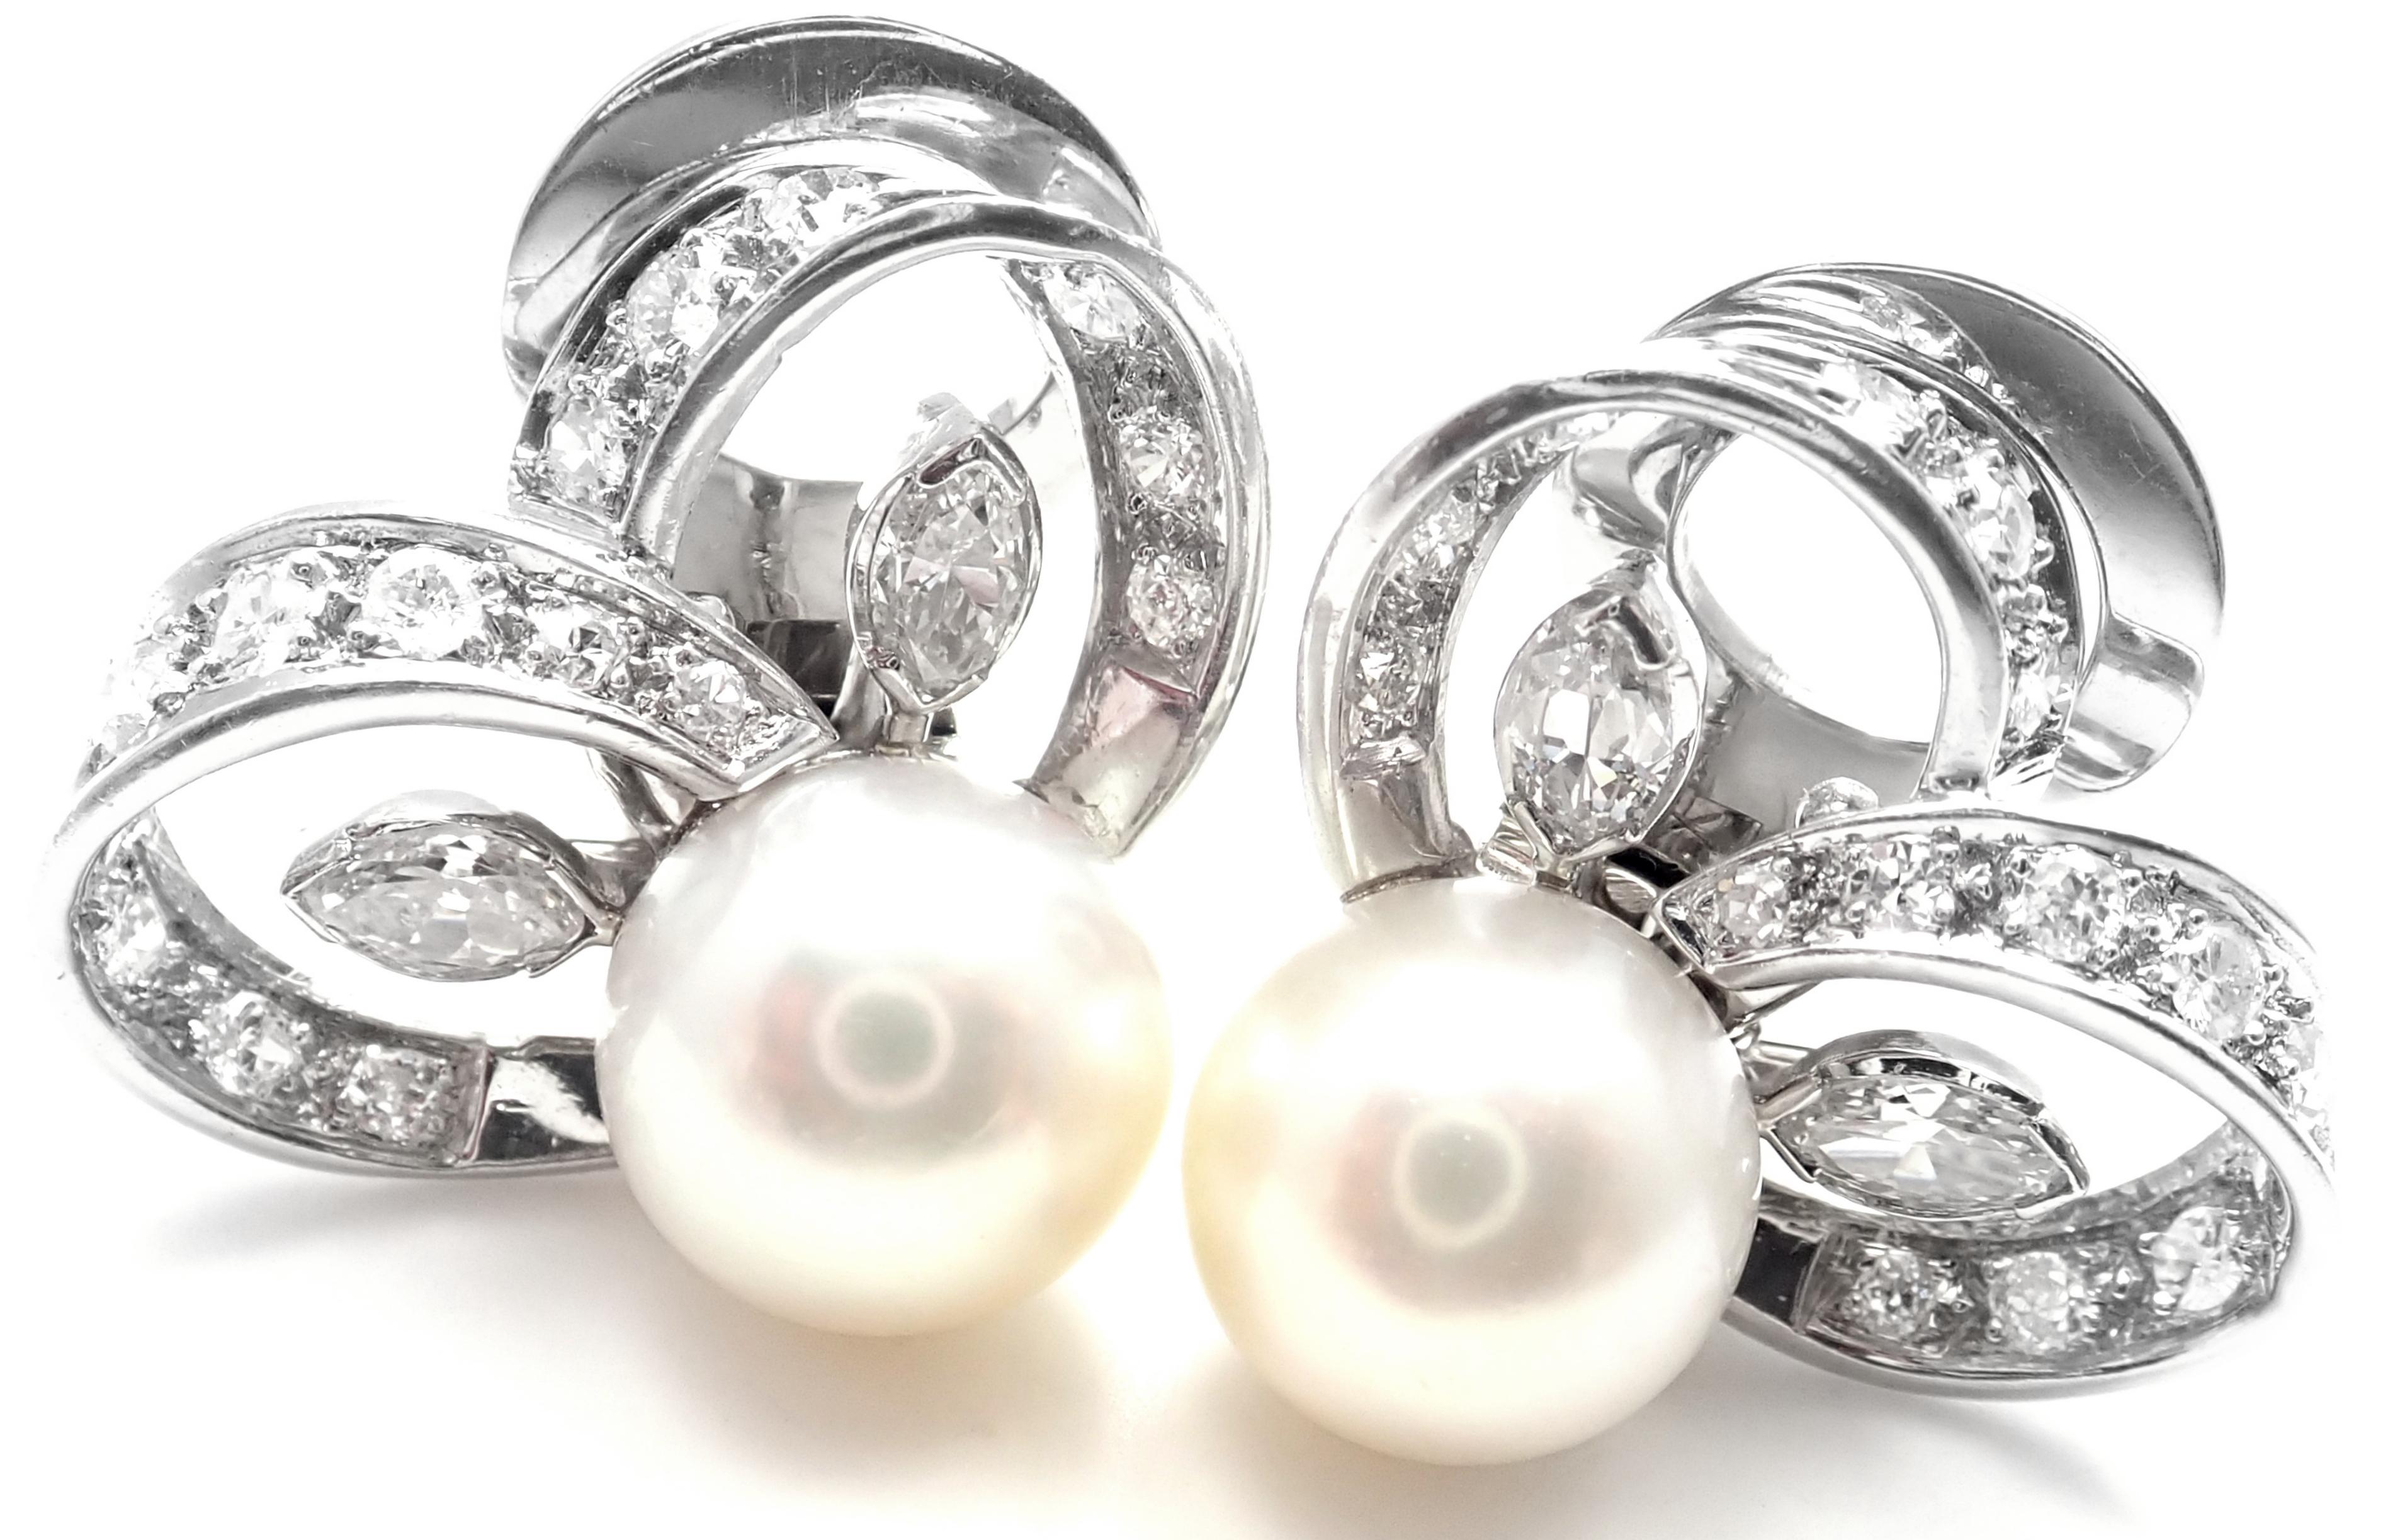 Platinum Diamond Pearl Vintage Earrings by Marianne Ostier. 
With 28 round brilliant cut diamonds VS1 clarity, G color 
4 marque shape diamonds VS1 clarity, G color
Total weight of diamonds approx. 1.20ct
2 Cultured Pearls 10mm each.
These earrings